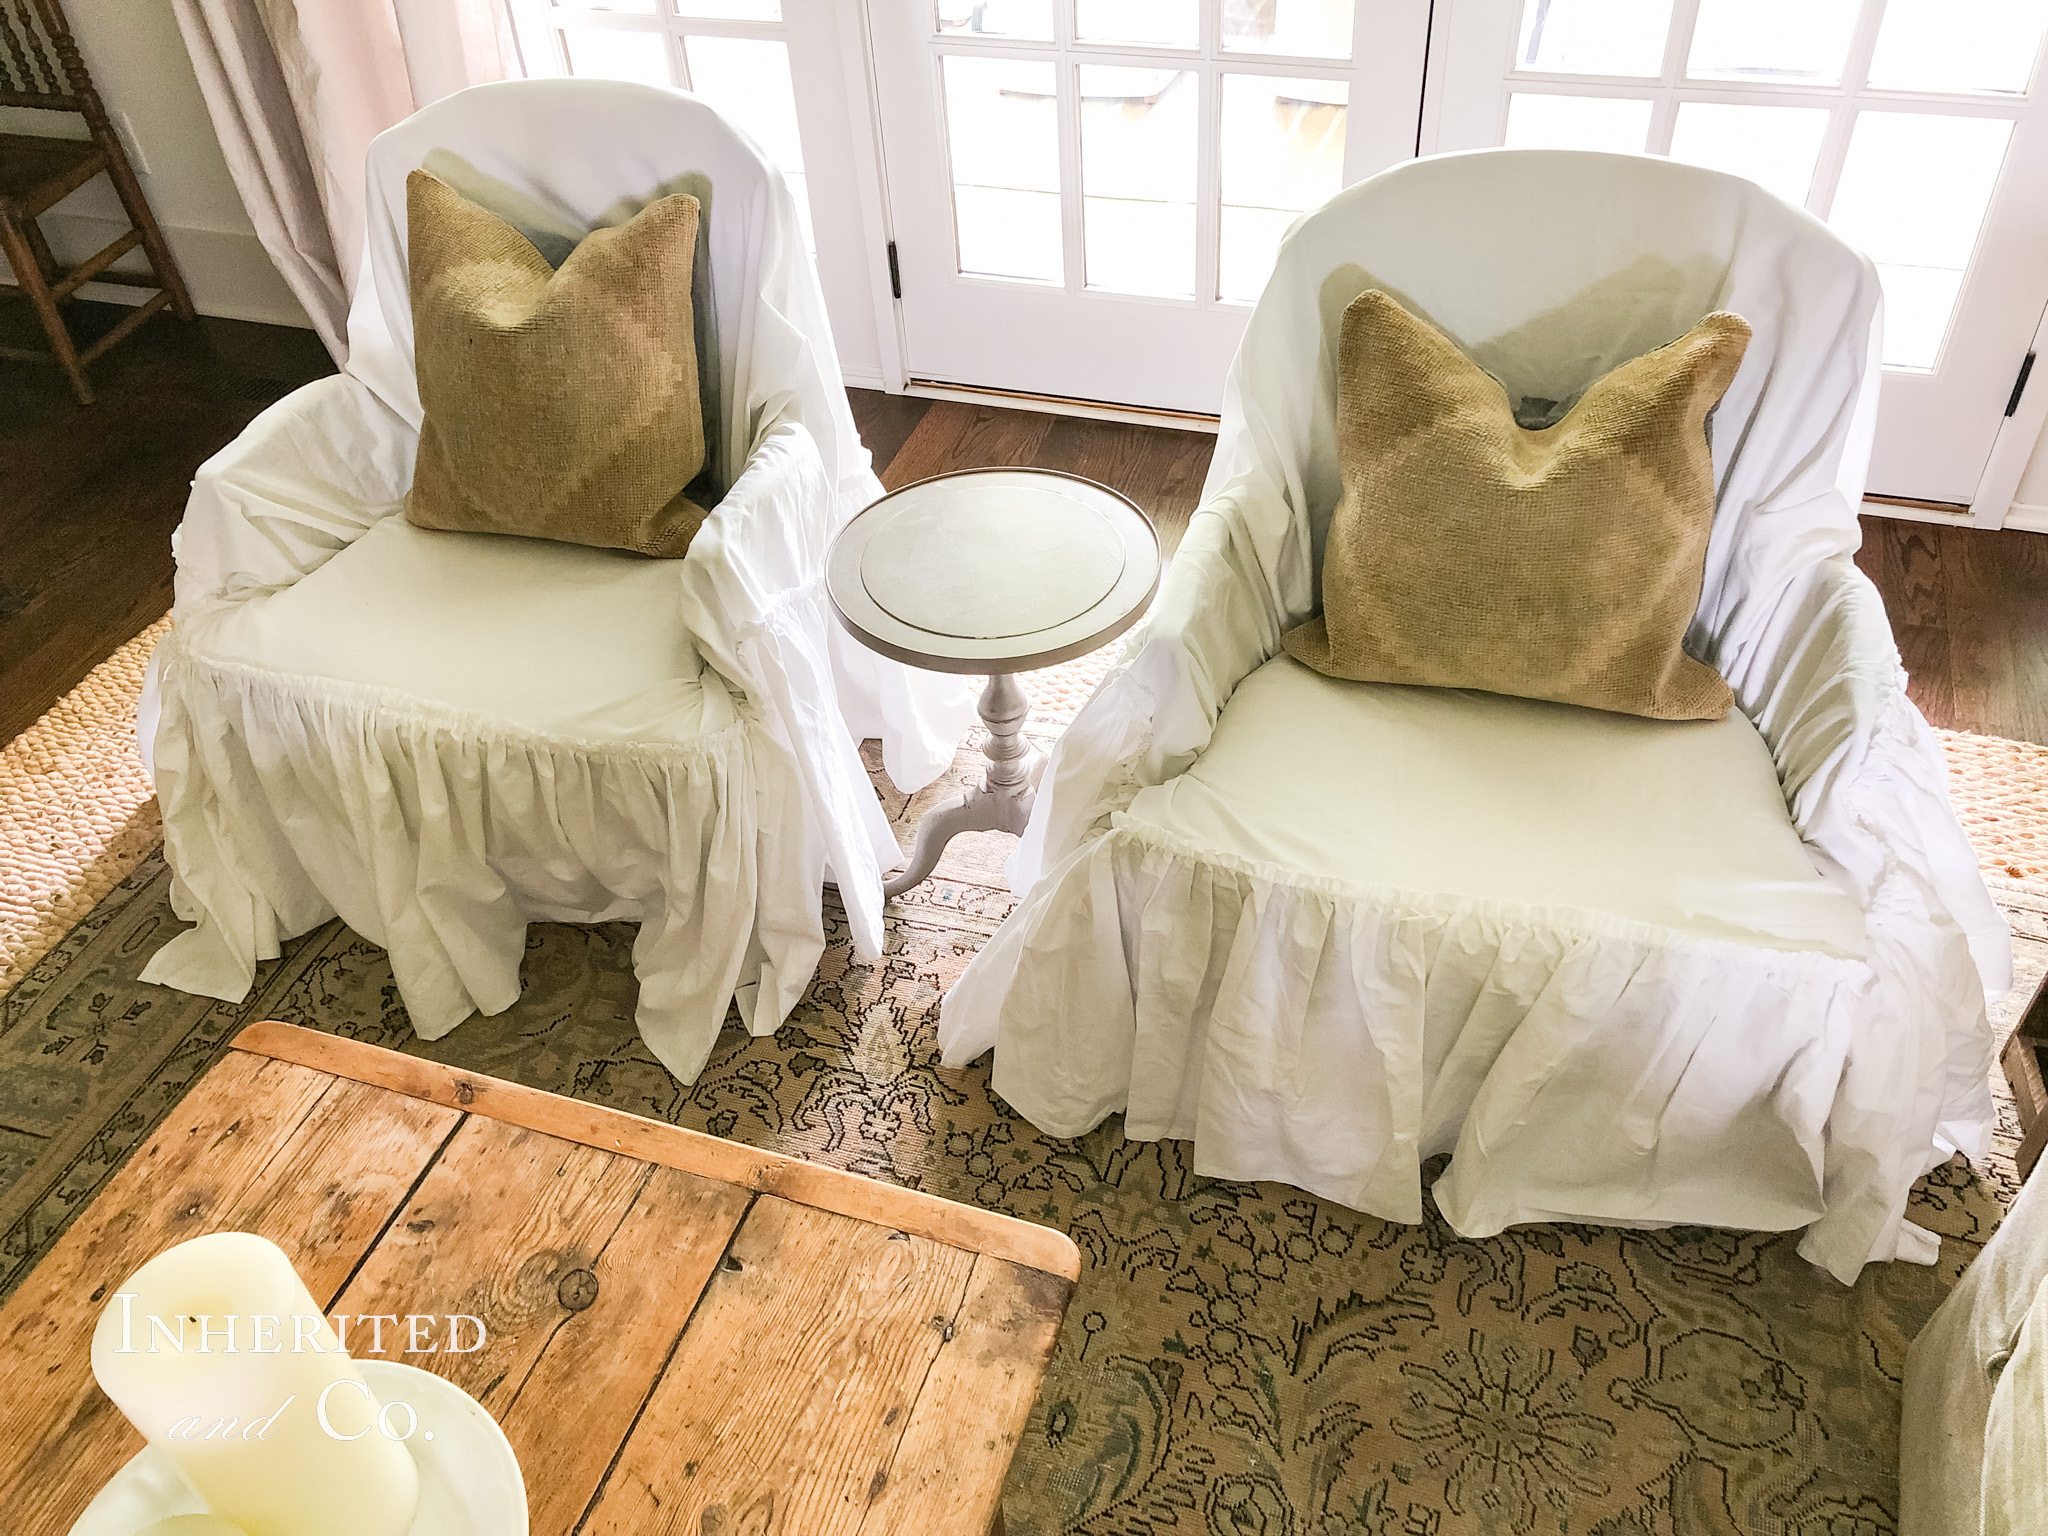 Pair of chairs with unfitted and ruffled white slipcovers